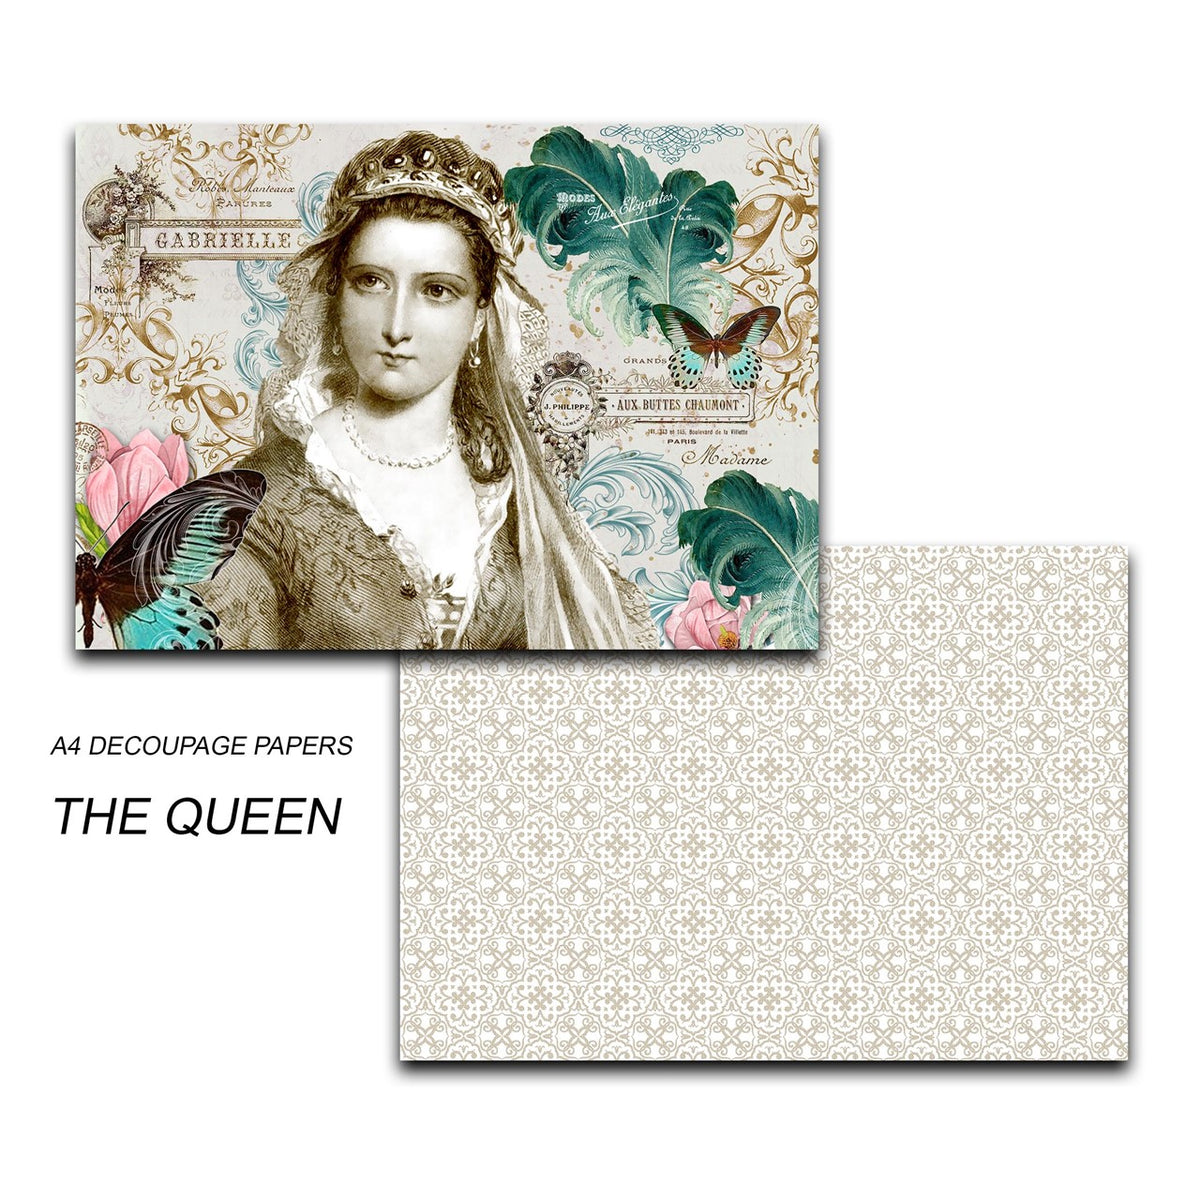 Papericious - Decoupage Papers - The Queen - A4 size